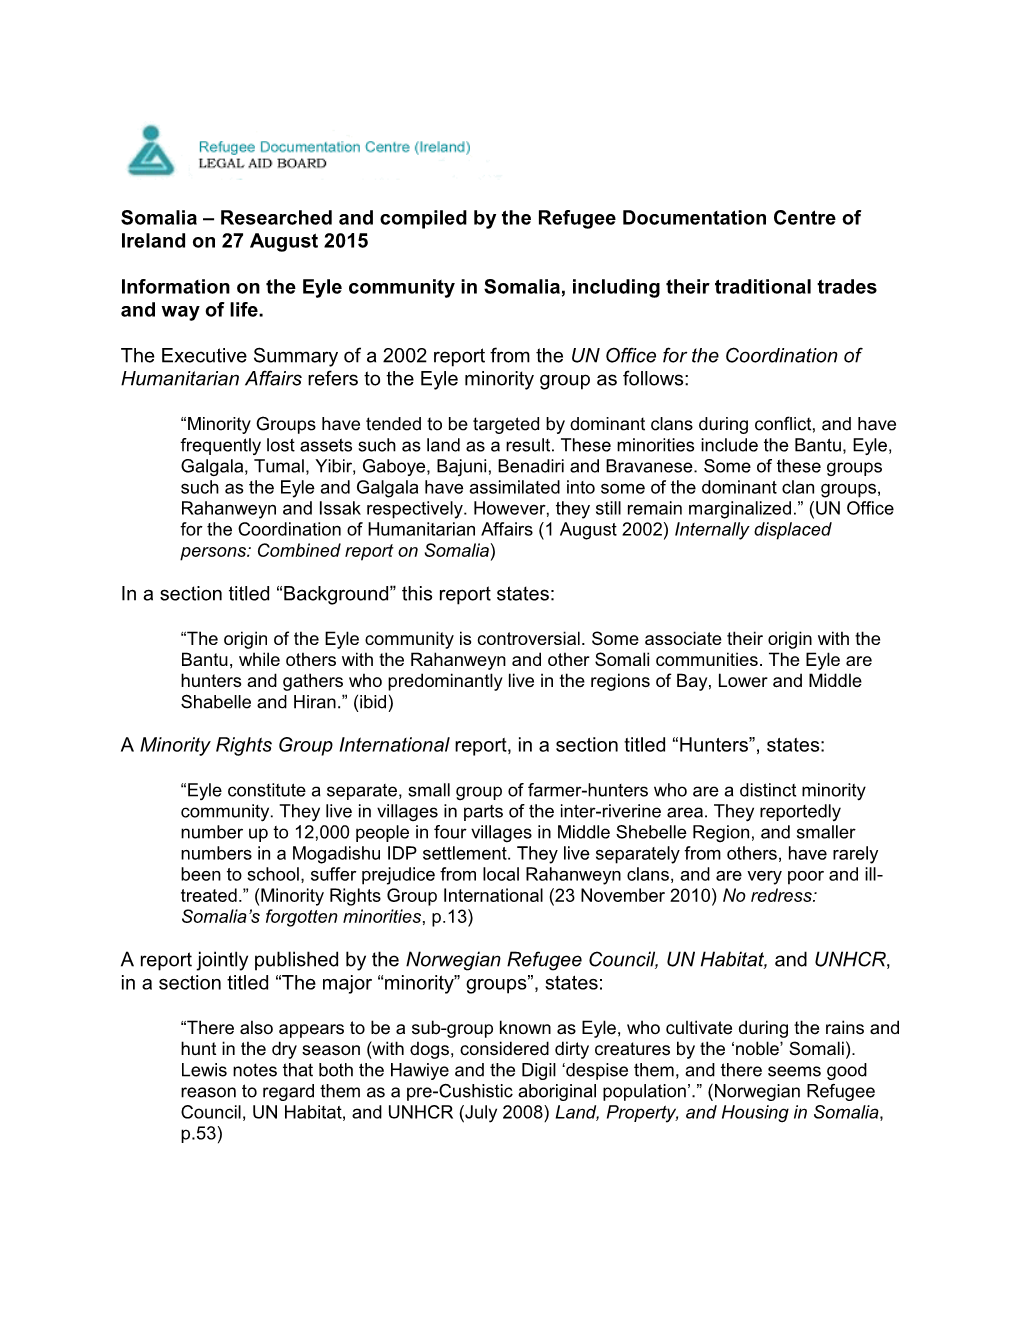 Somalia – Researched and Compiled by the Refugee Documentation Centre of Ireland on 27 August 2015